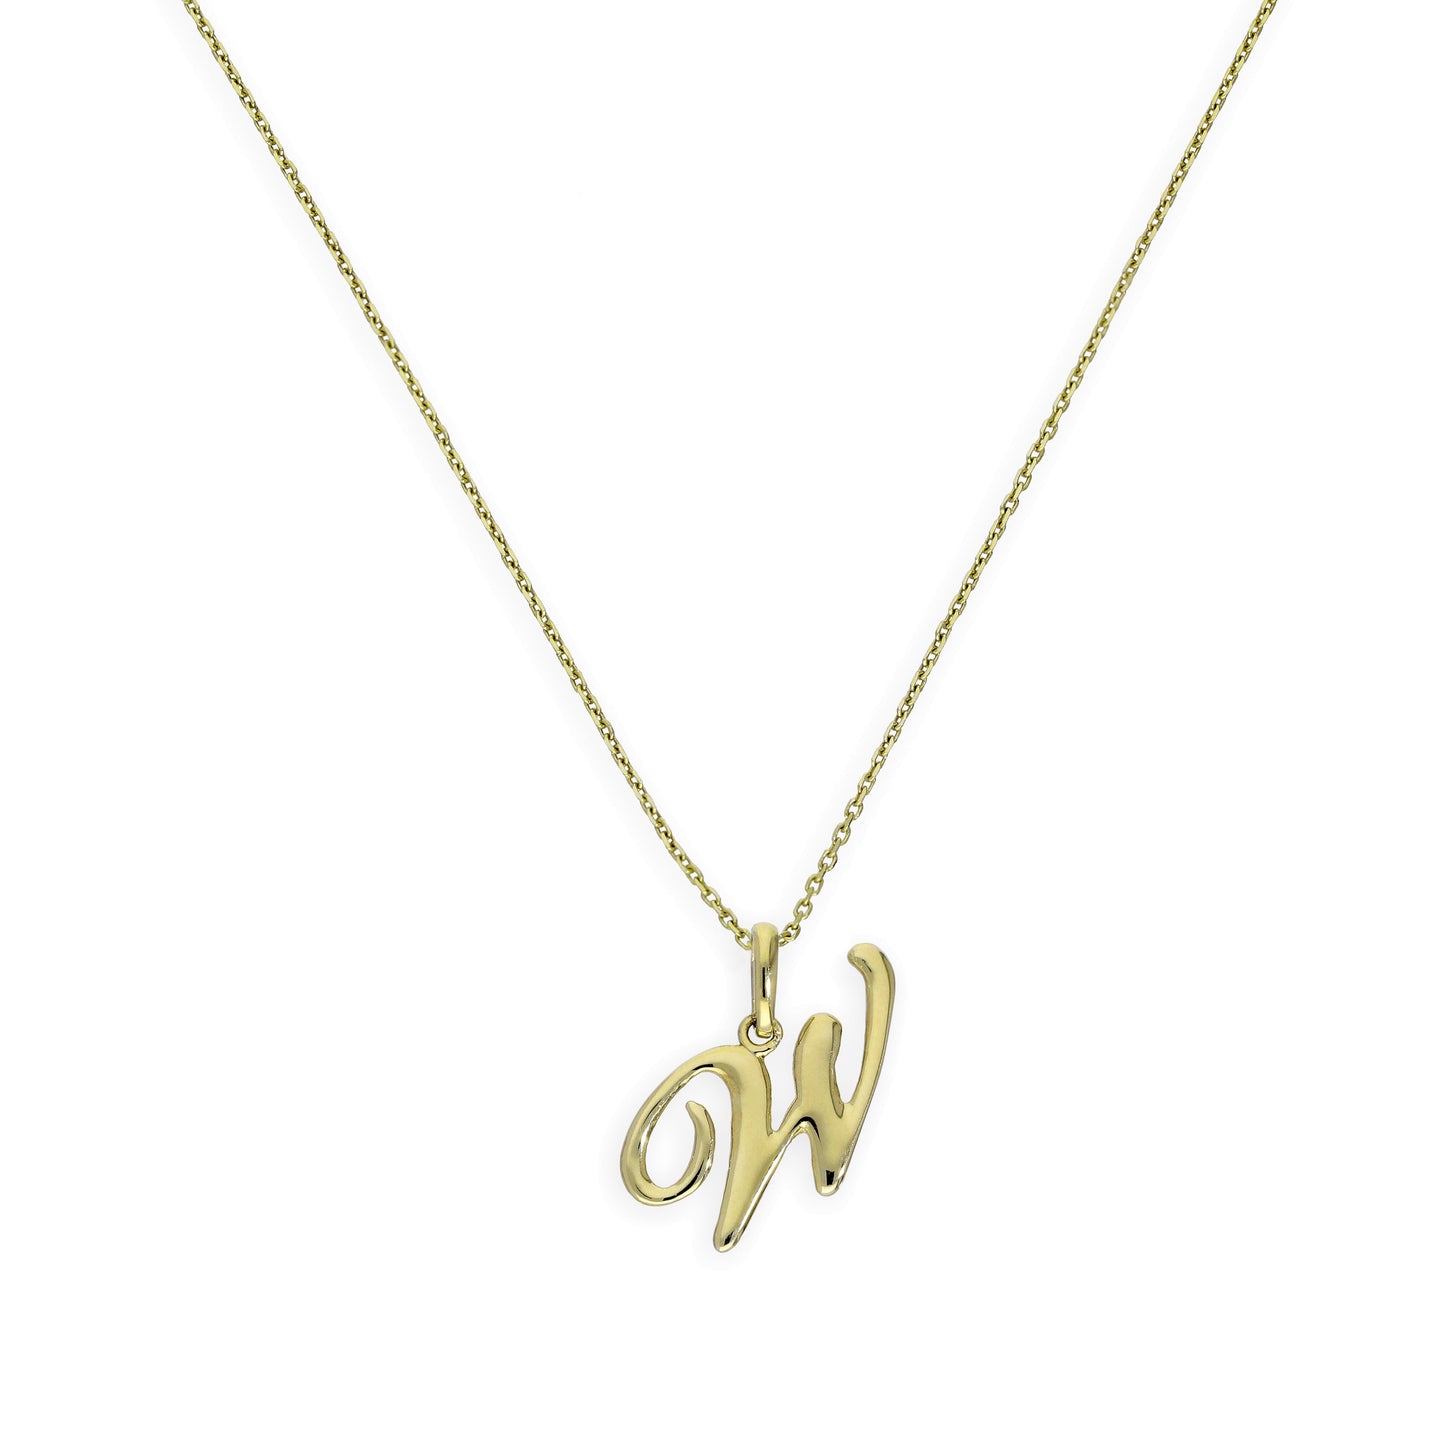 9ct Gold Fancy Calligraphy Script Letter W Pendant Necklace 16 - 20 Inches